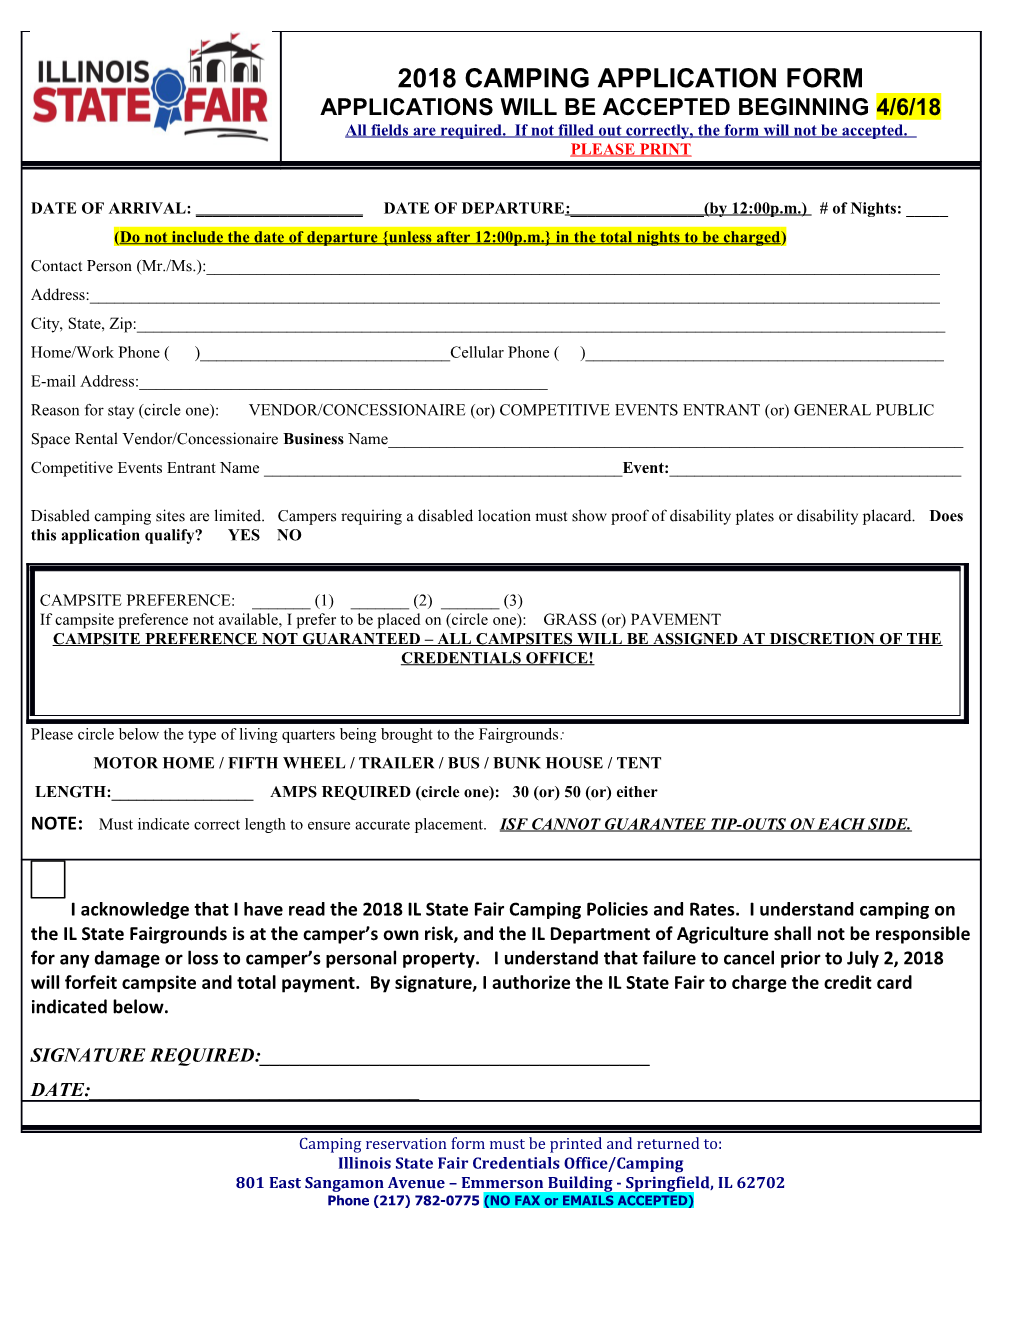 Camping Reservation Form Must Be Printed and Returned To